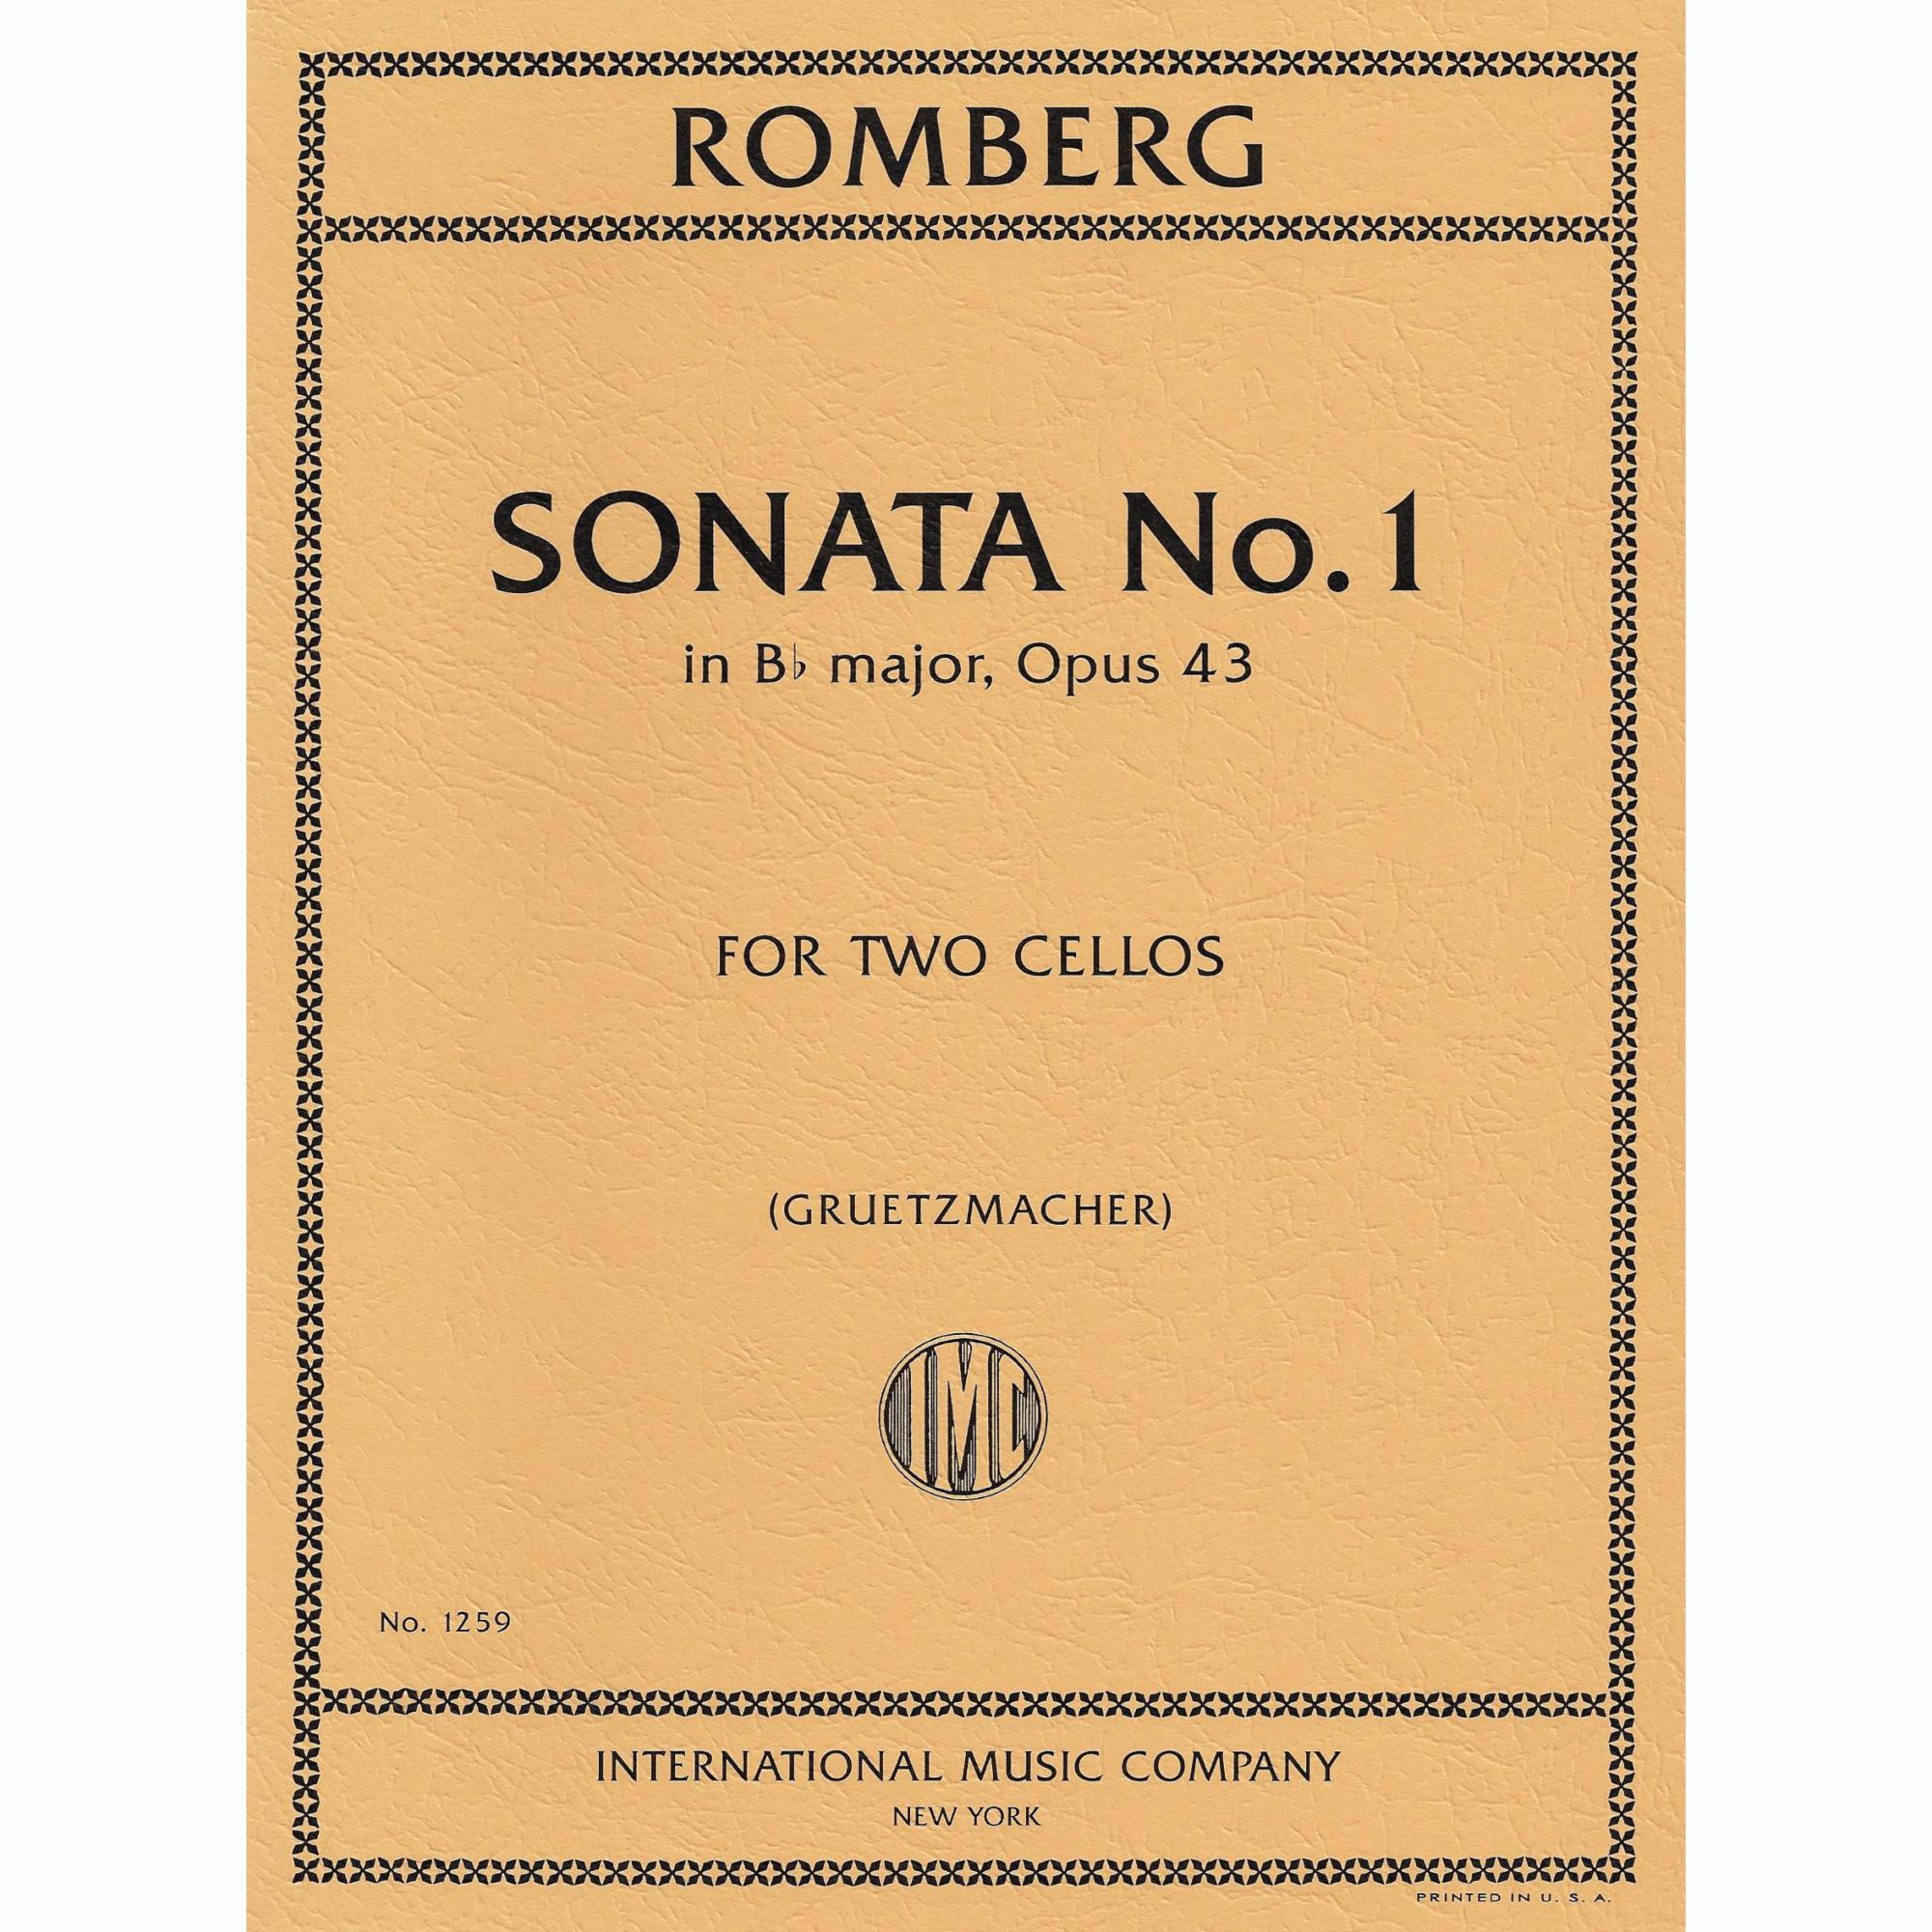 Romberg -- Sonata No. 1 in B-flat Major, Op. 43 for Two Cellos